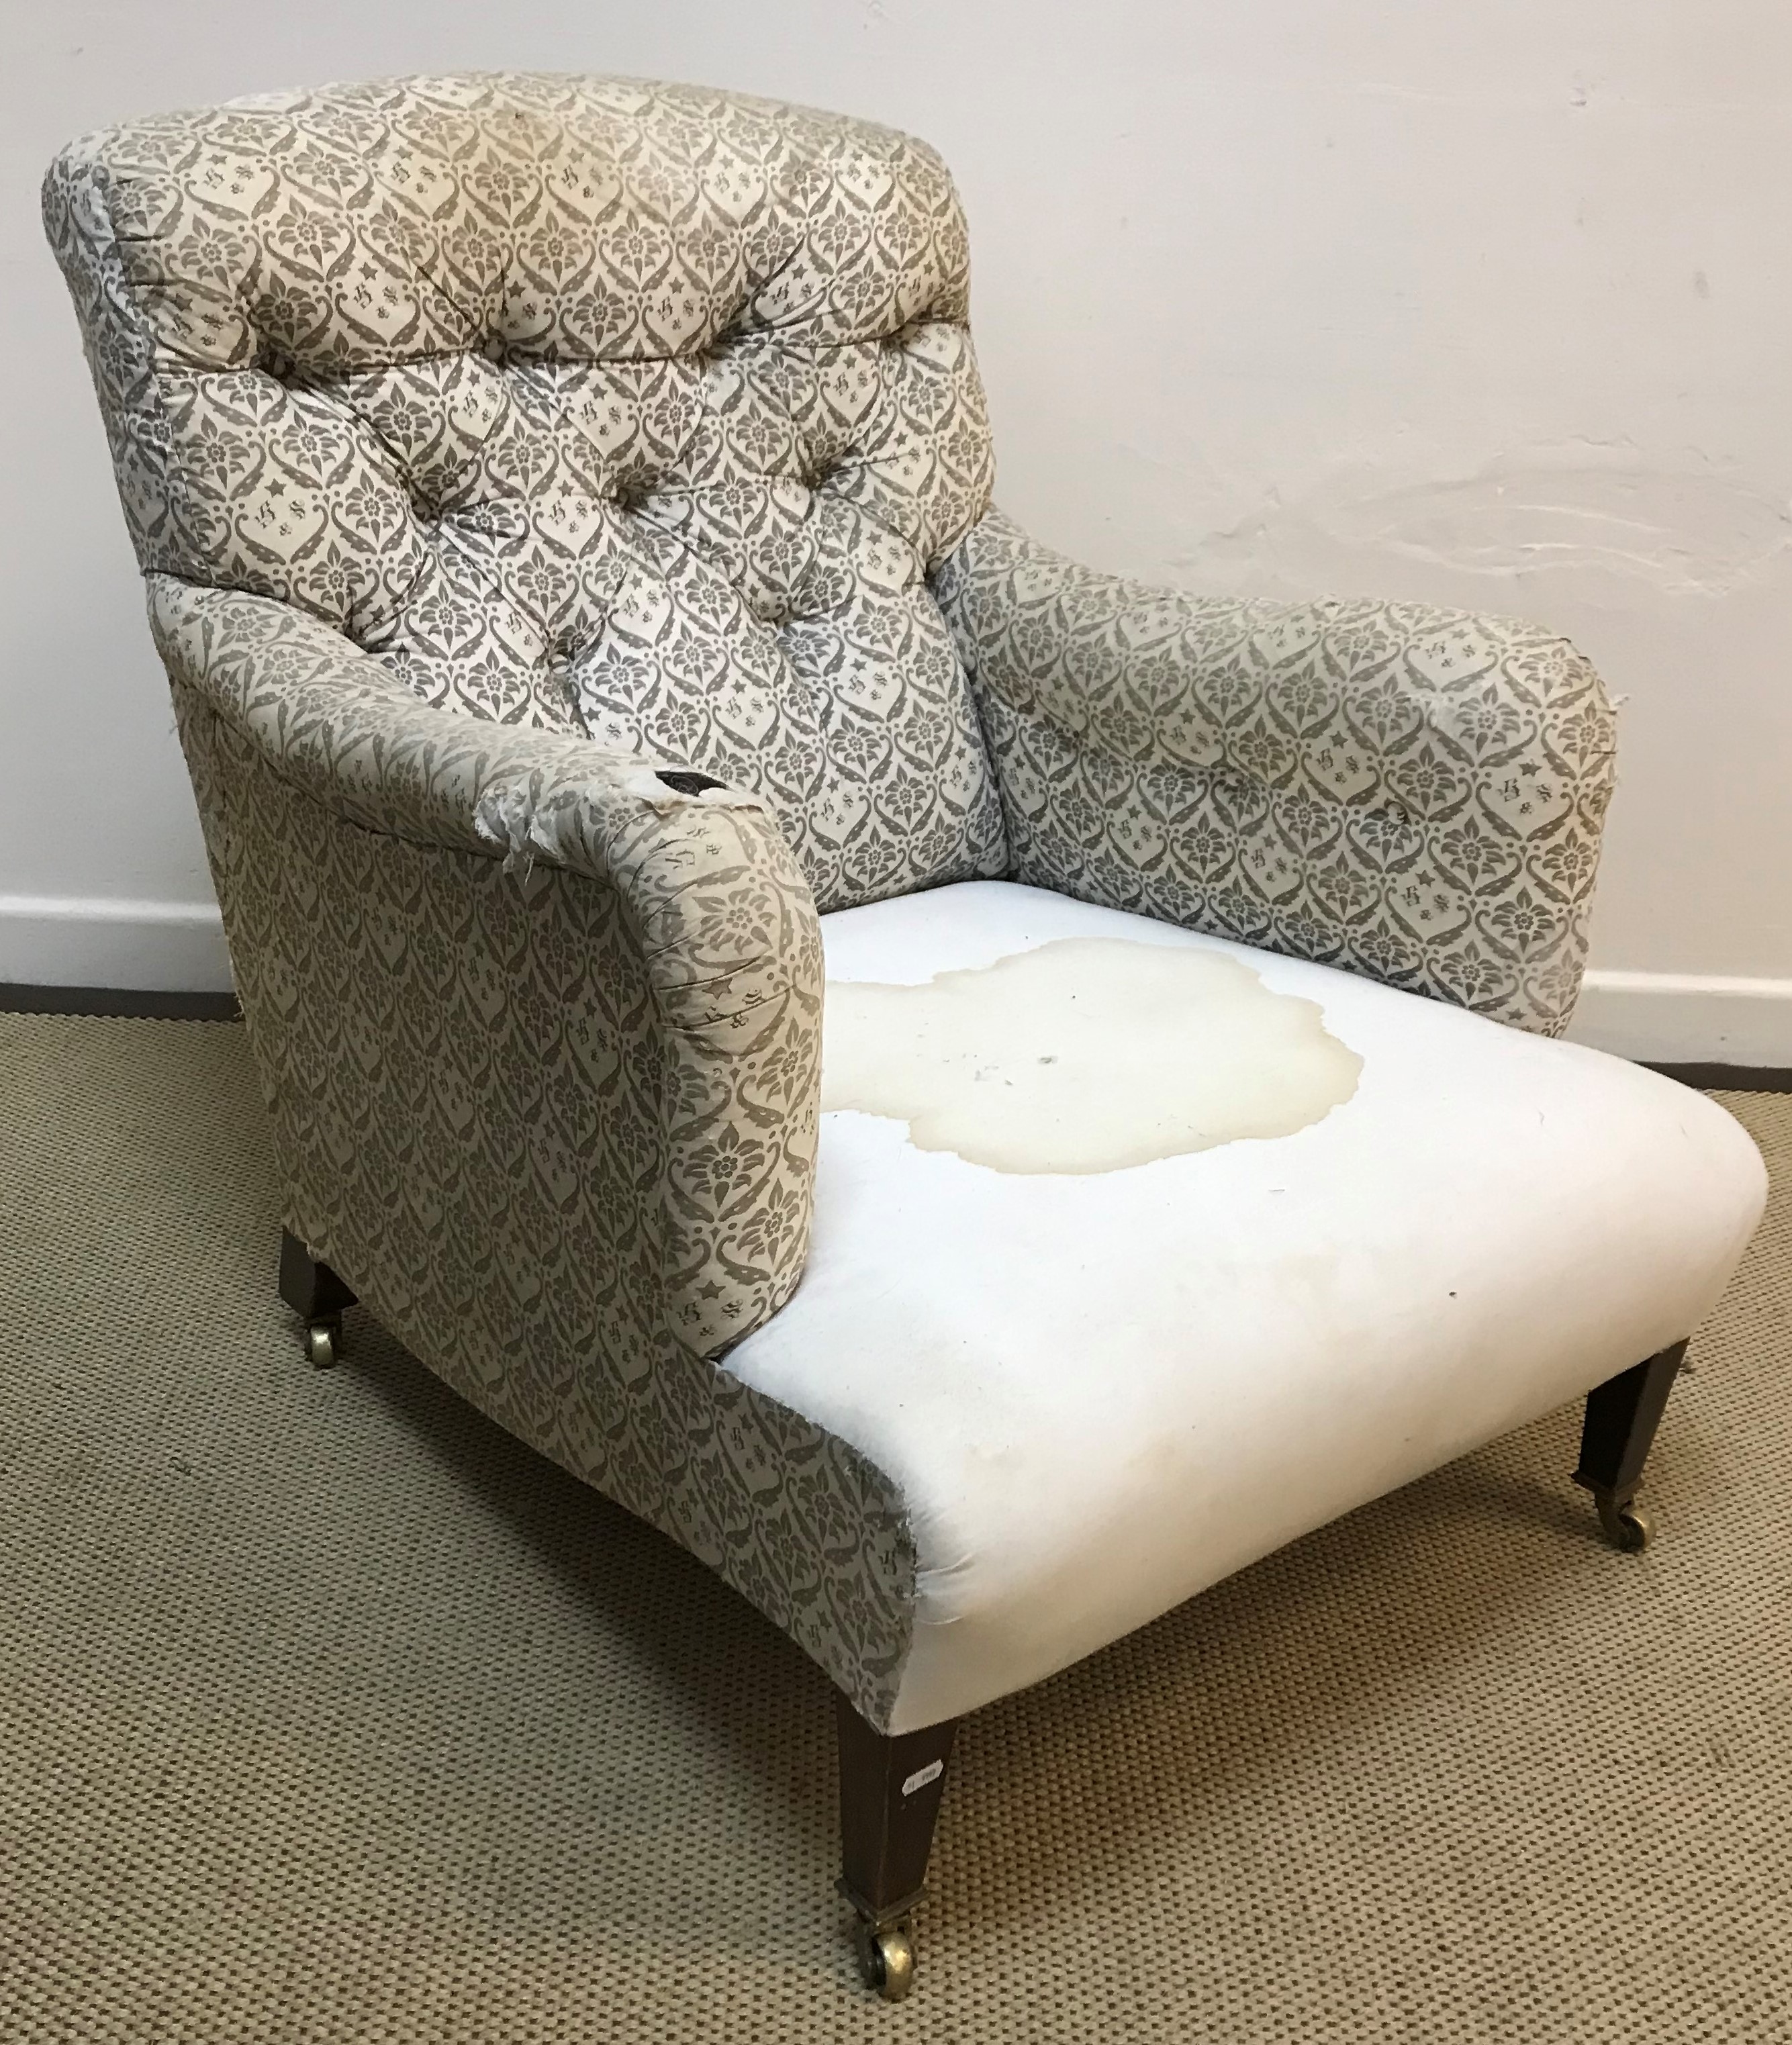 A circa 1900 upholstered armchair by Howard & Sons of London with original "H & S" ticking to the